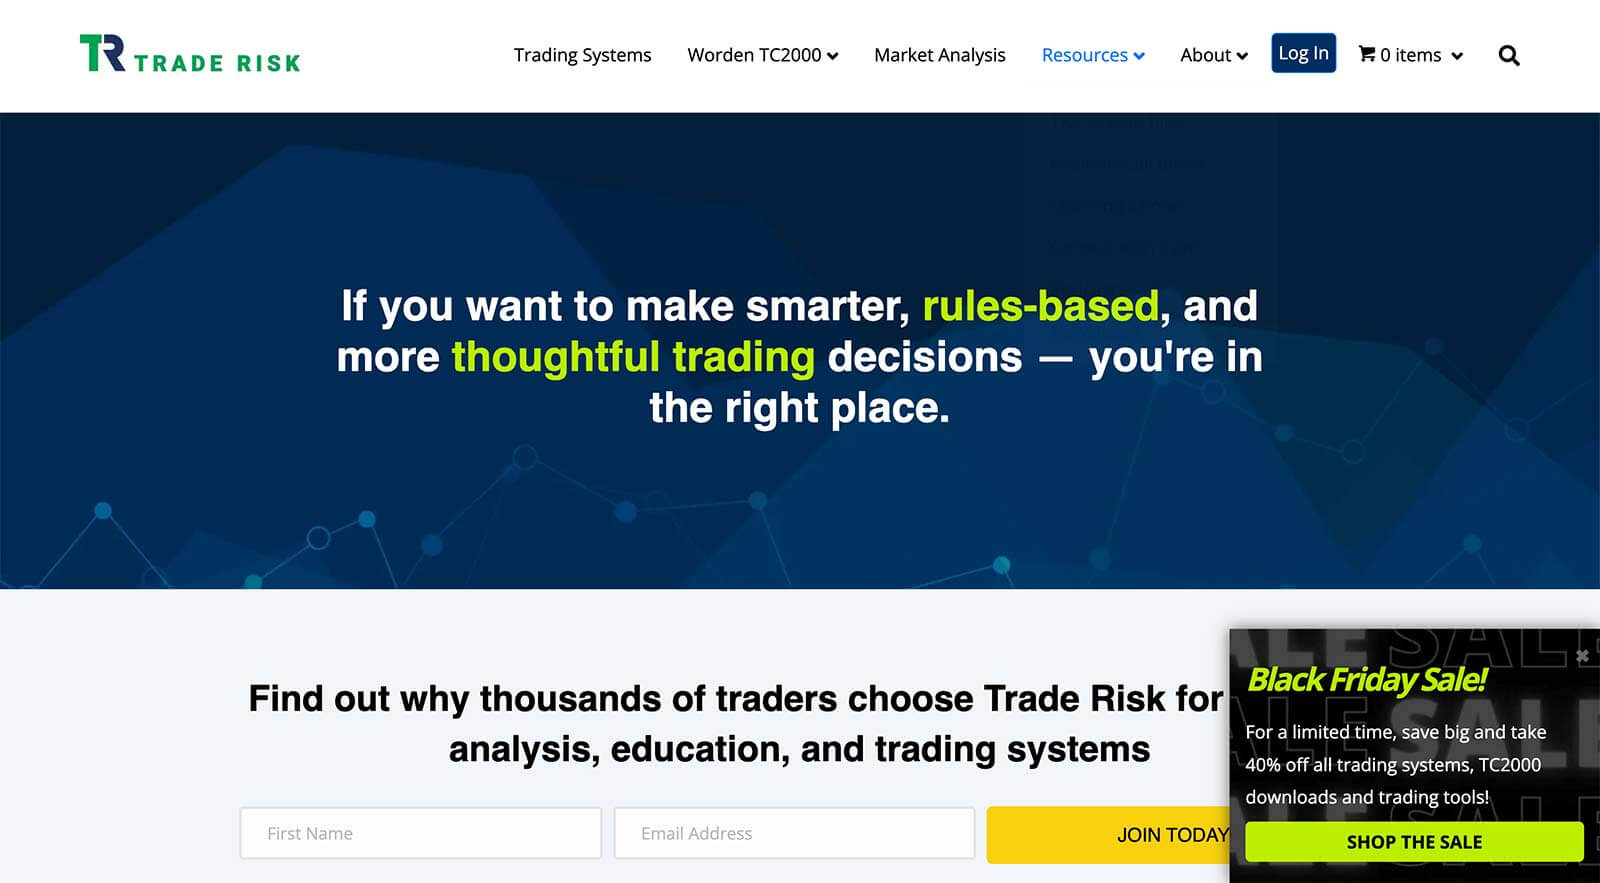 The Trade Risk Homepage